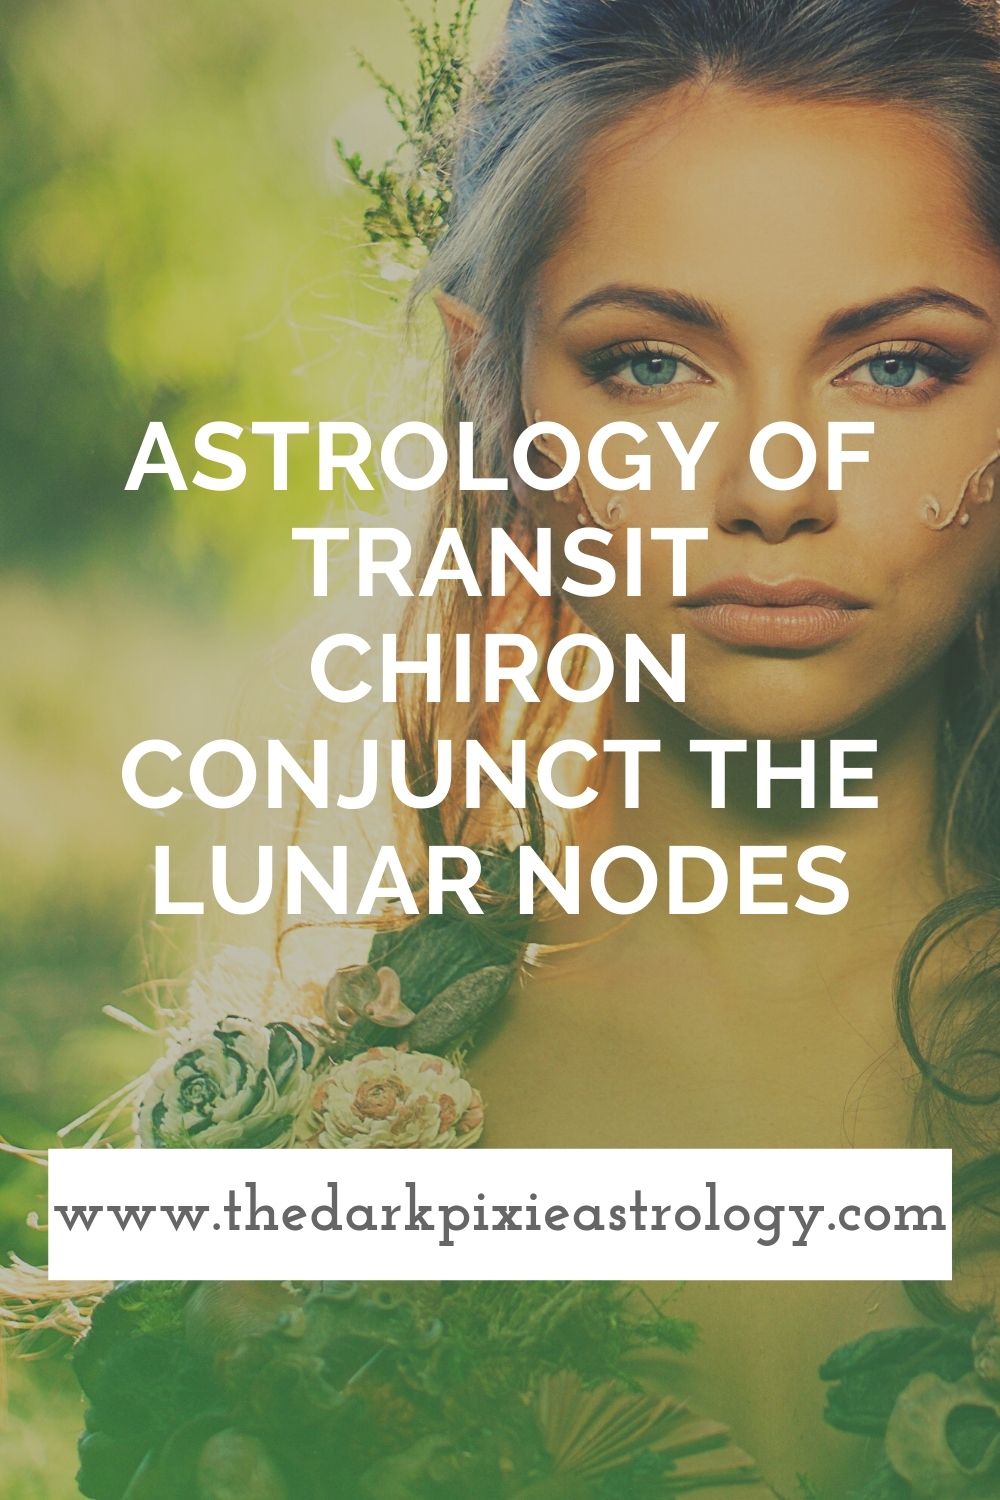 Astrology of Transit Chiron Conjunct the Lunar Nodes - The Dark Pixie Astrology